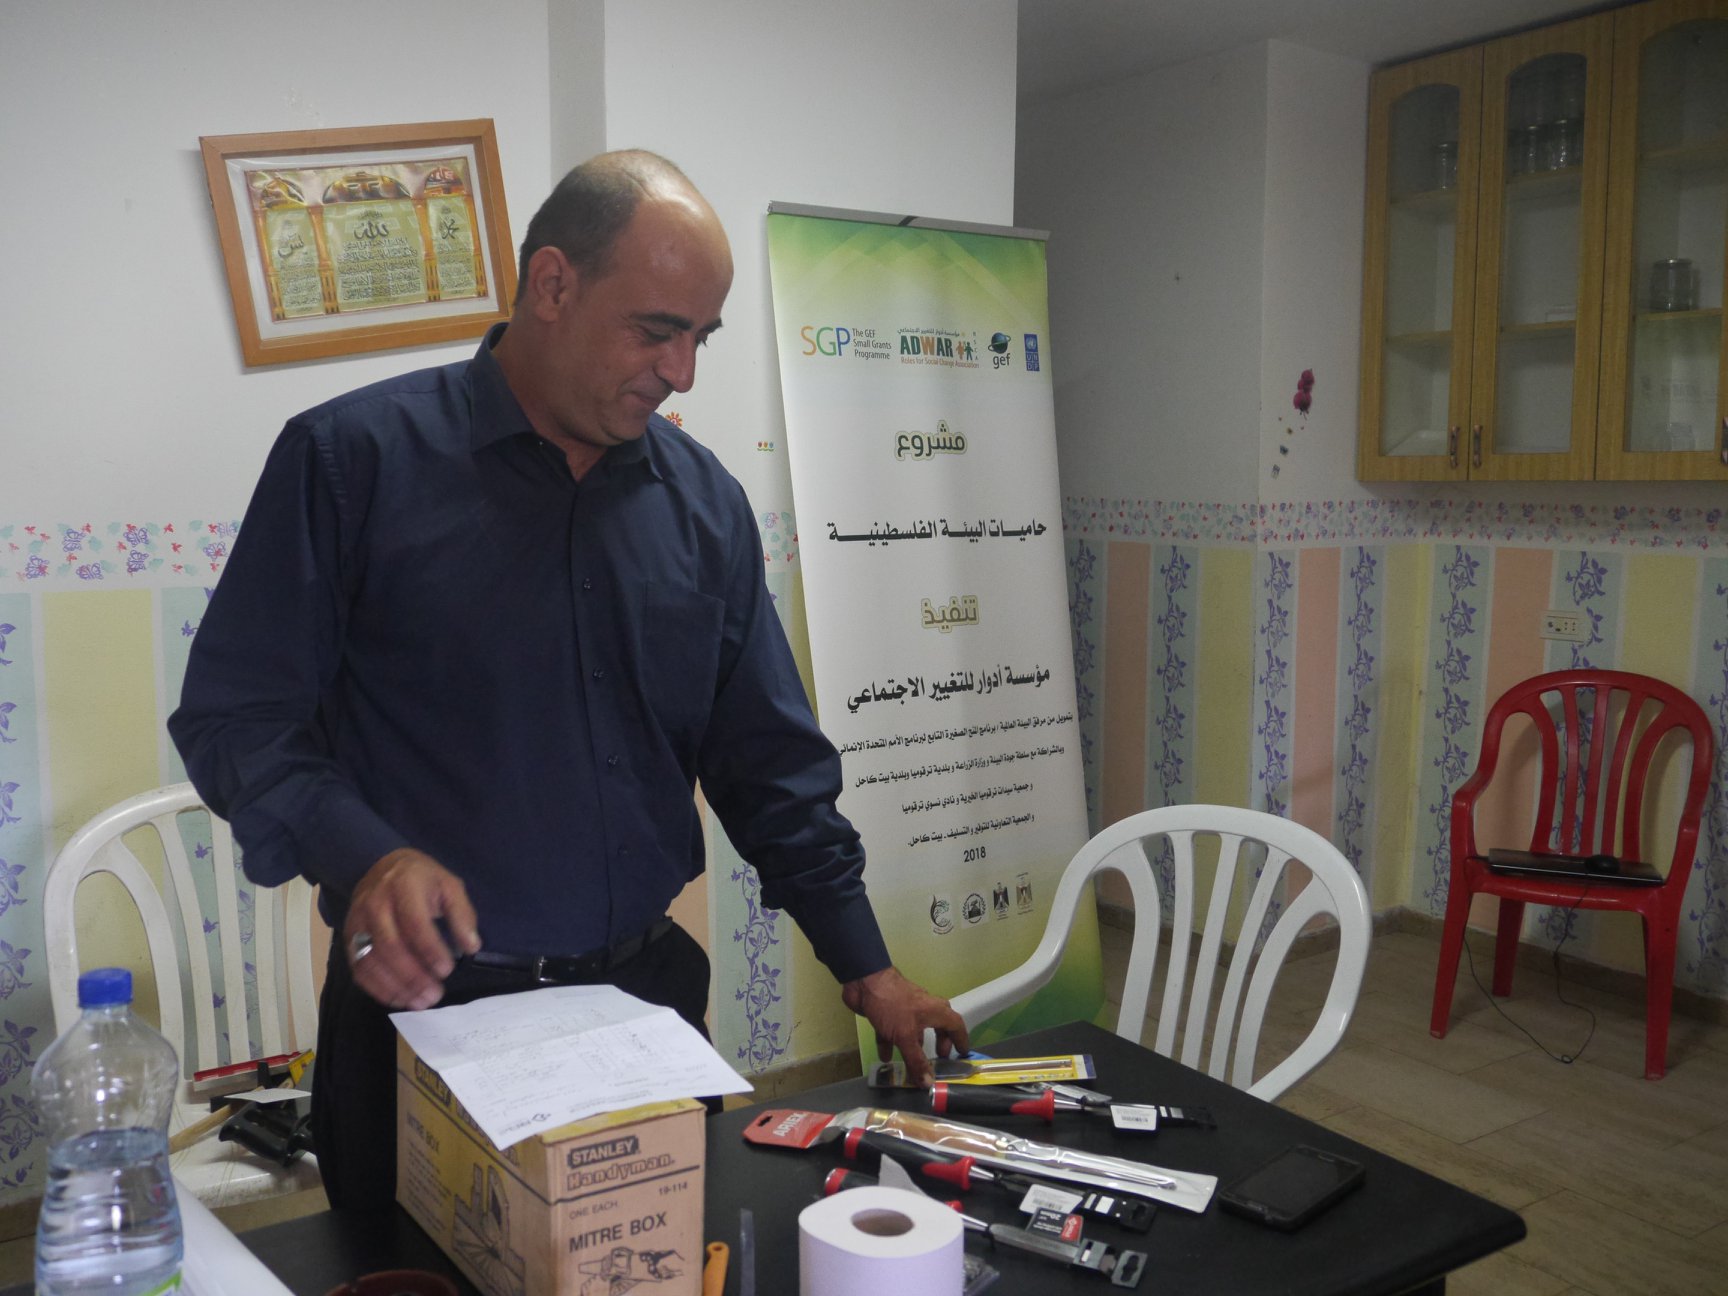  Roles for Social Change Association-ADWAR conducted the first activity of its vocational training program entitled “Training members of Palestinian Environment Guards Committees on recycling waste in Wad al-Quff reserve”